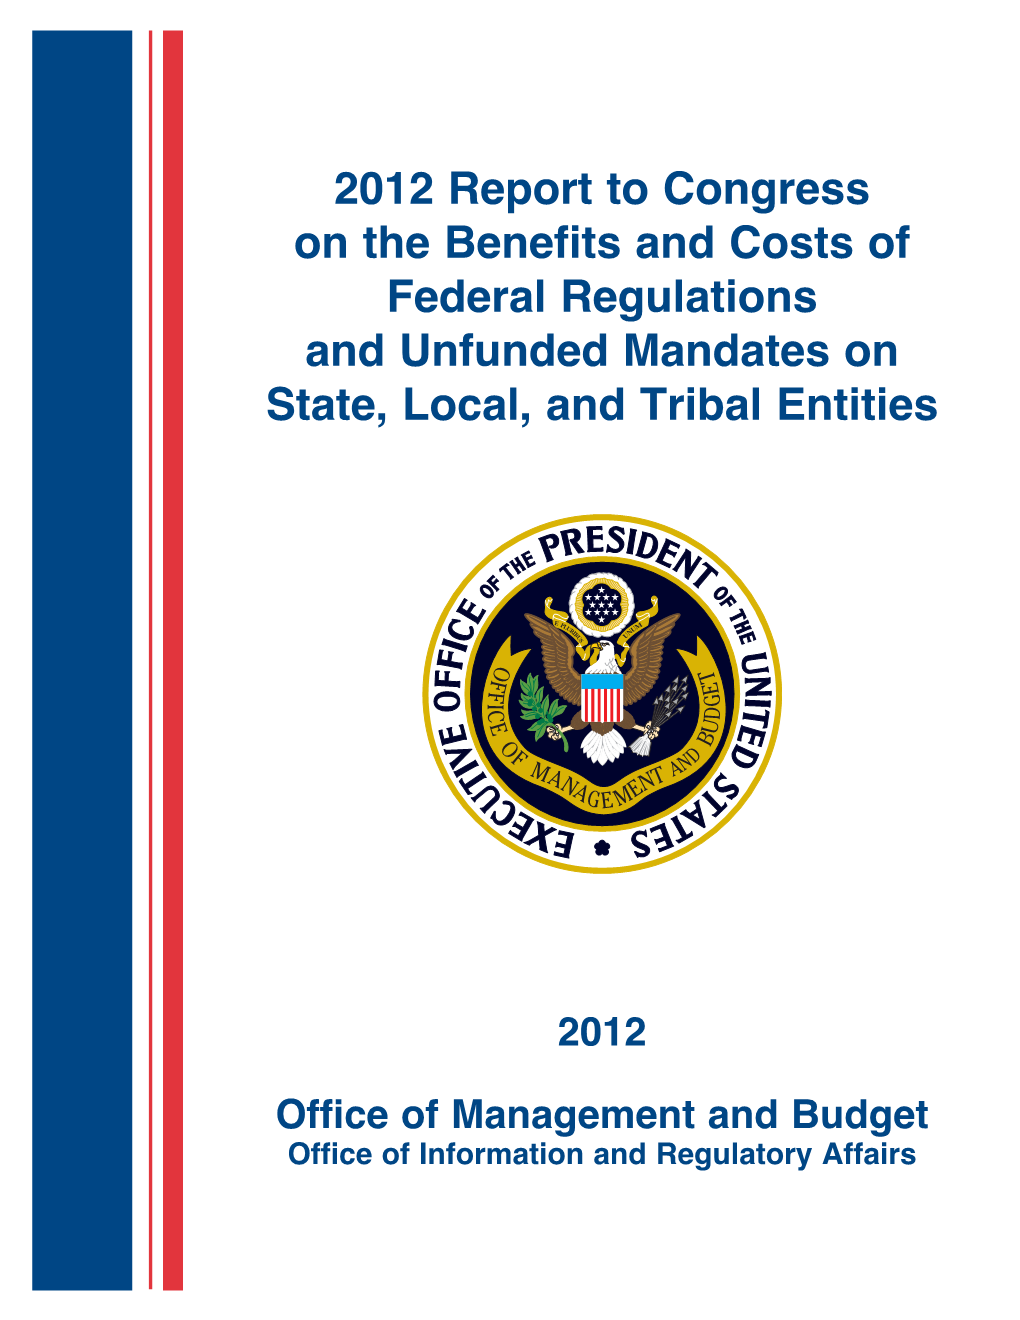 2012 Report to Congress on the Benefits and Costs of Federal Regulations and Unfunded Mandates on State, Local, and Tribal Entities